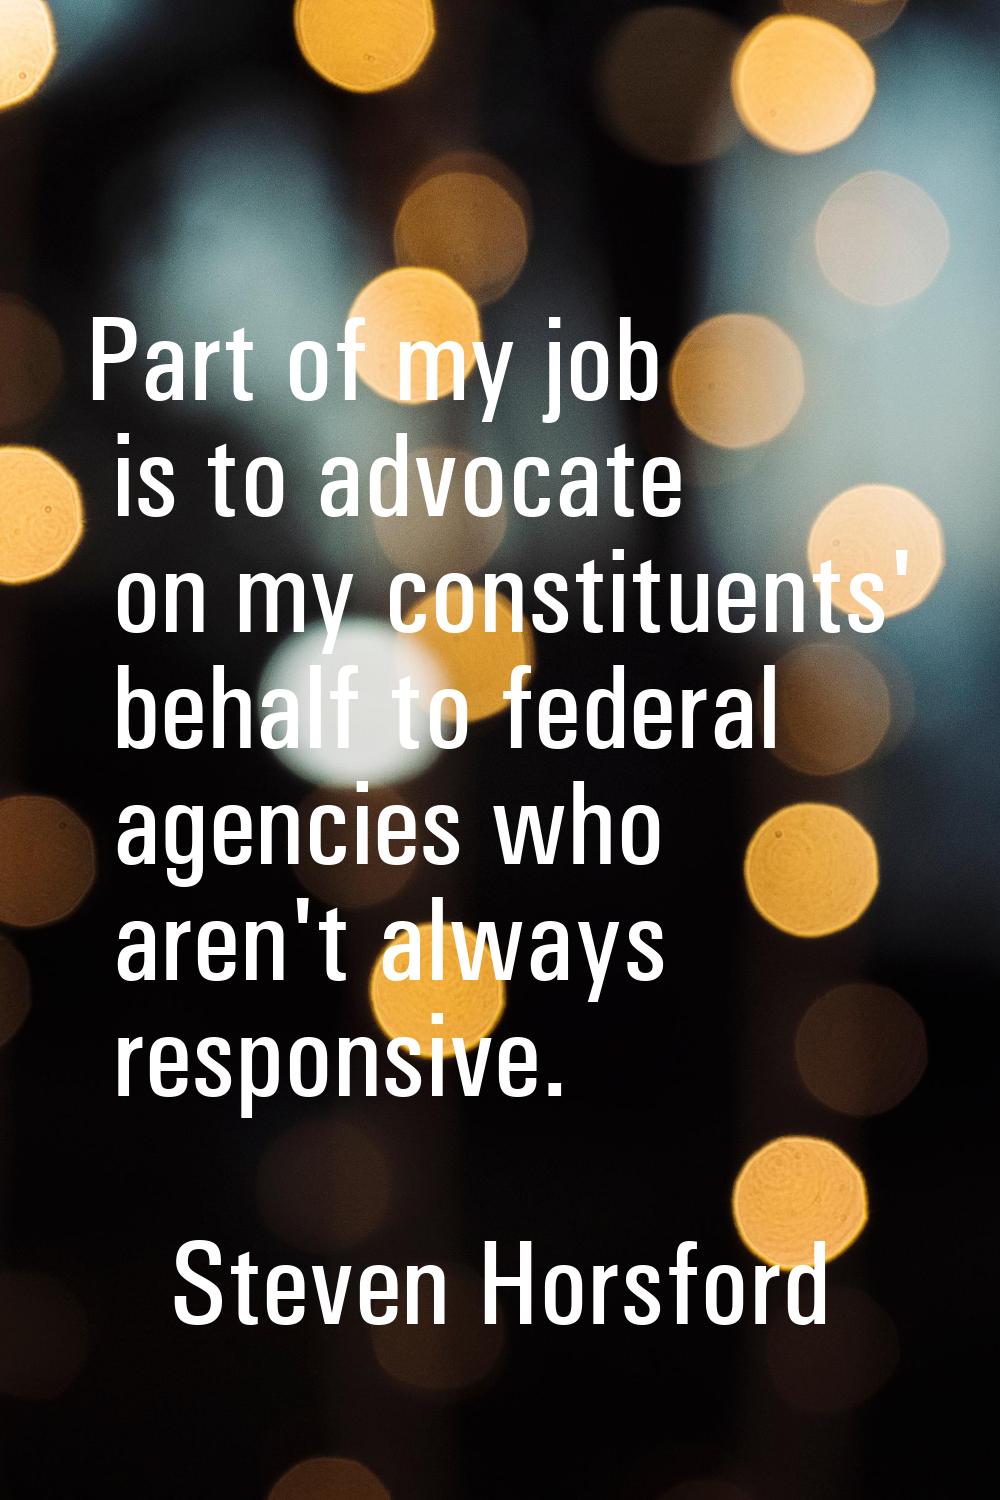 Part of my job is to advocate on my constituents' behalf to federal agencies who aren't always resp